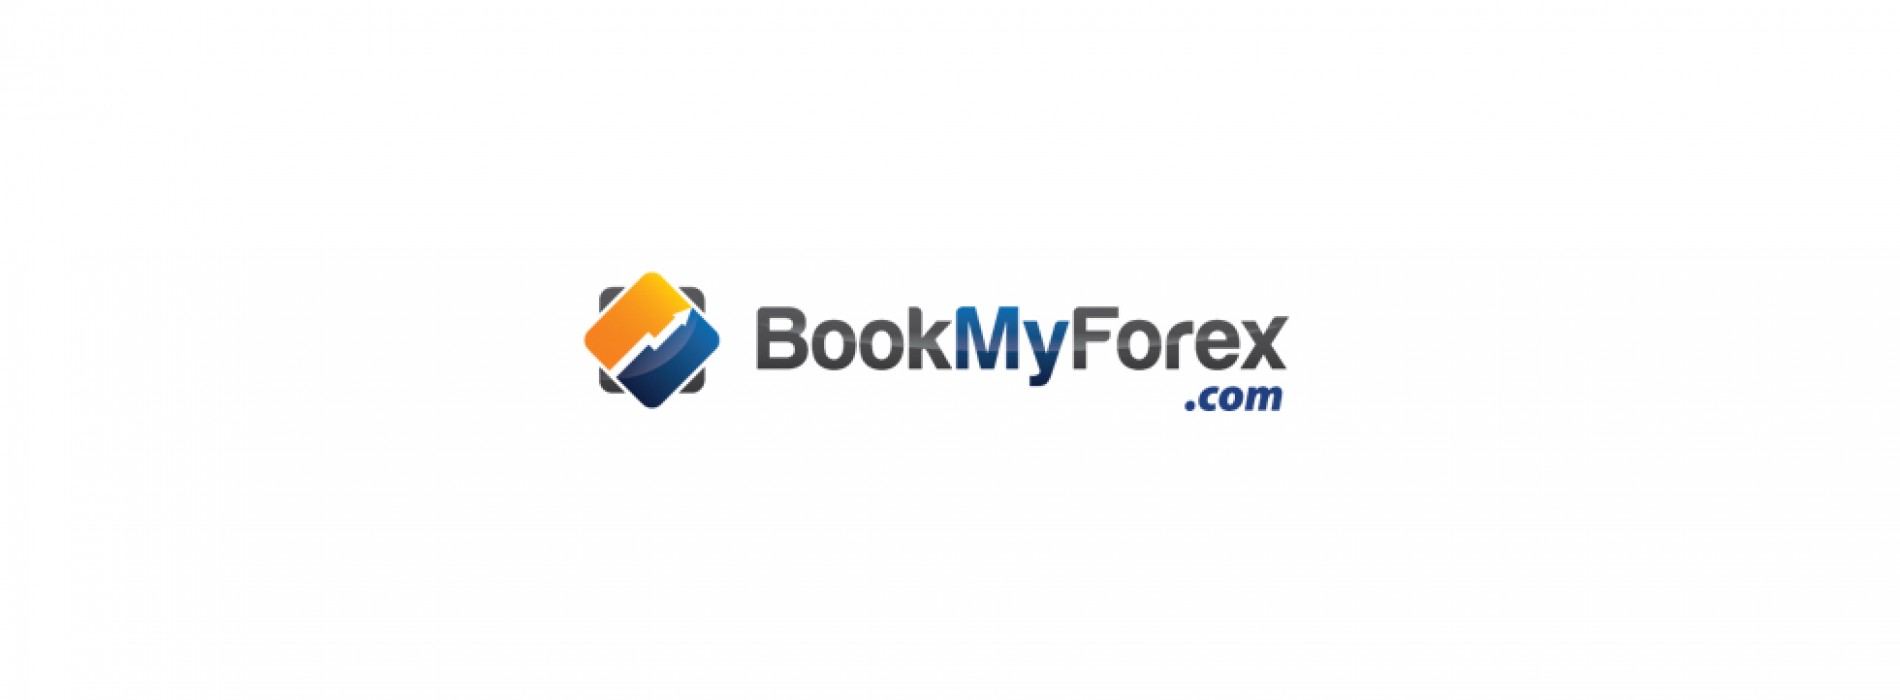 BookMyForex.com launches the #BigForexSale in India for international travelers